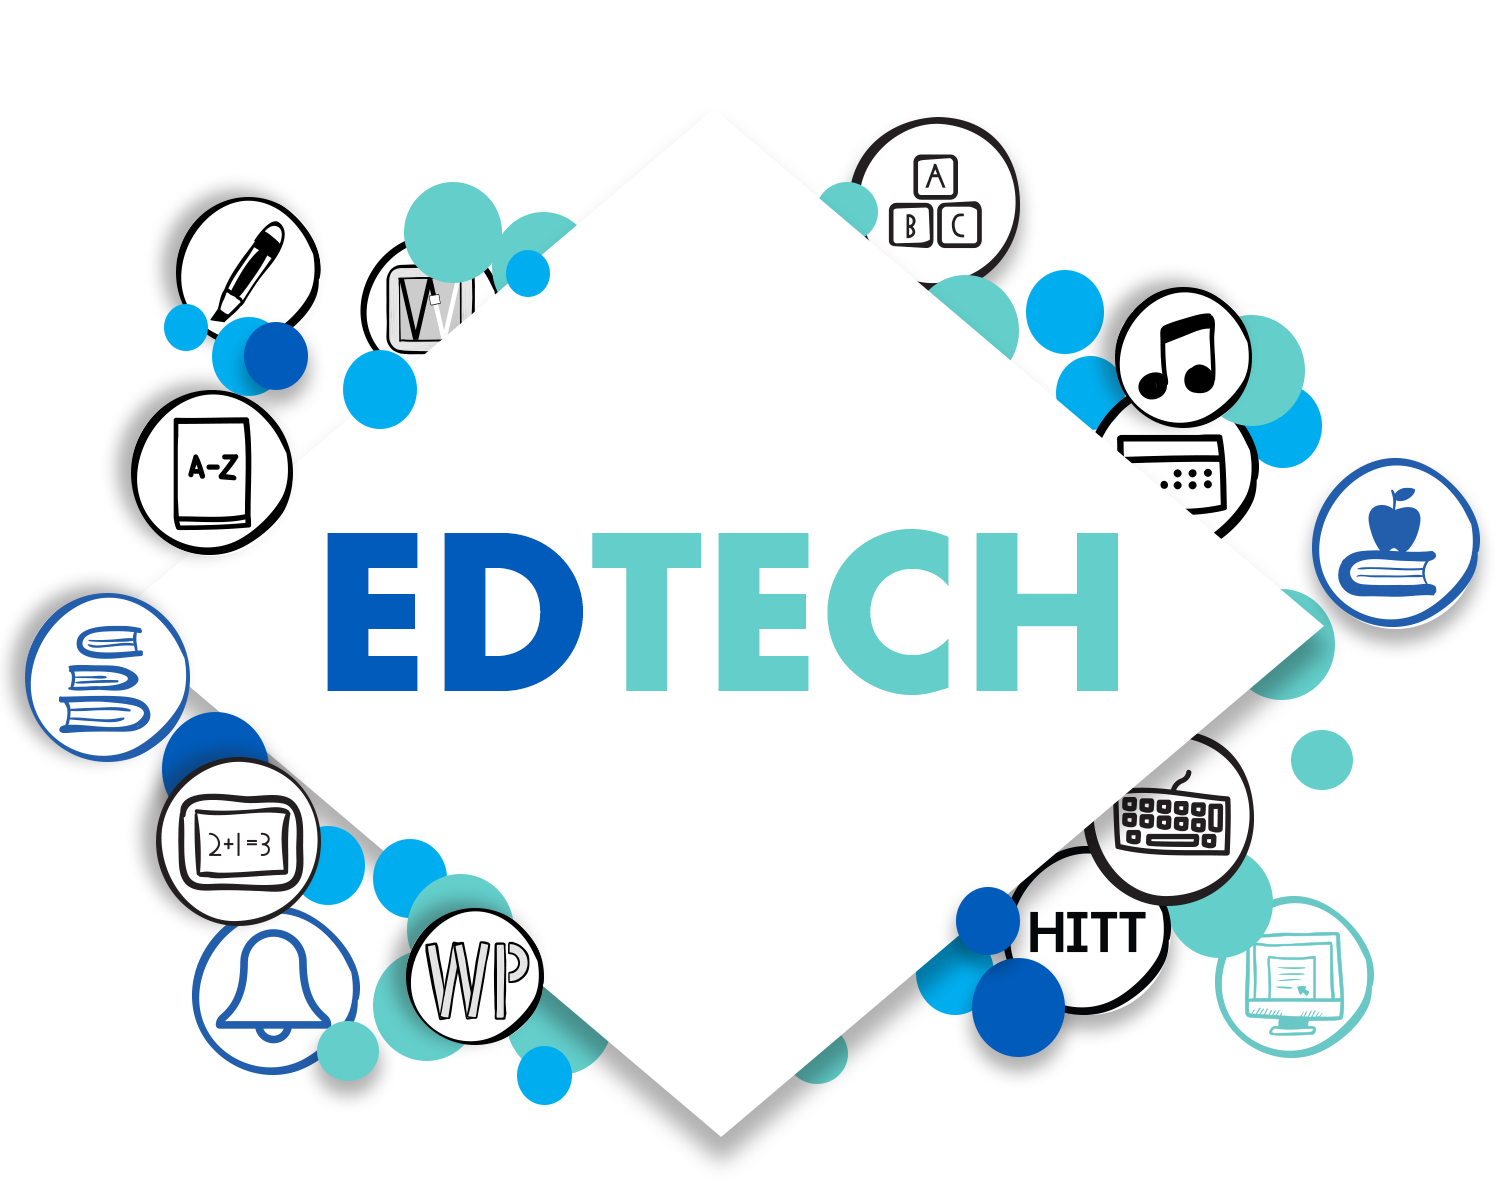 March 2019 Education Technology blog